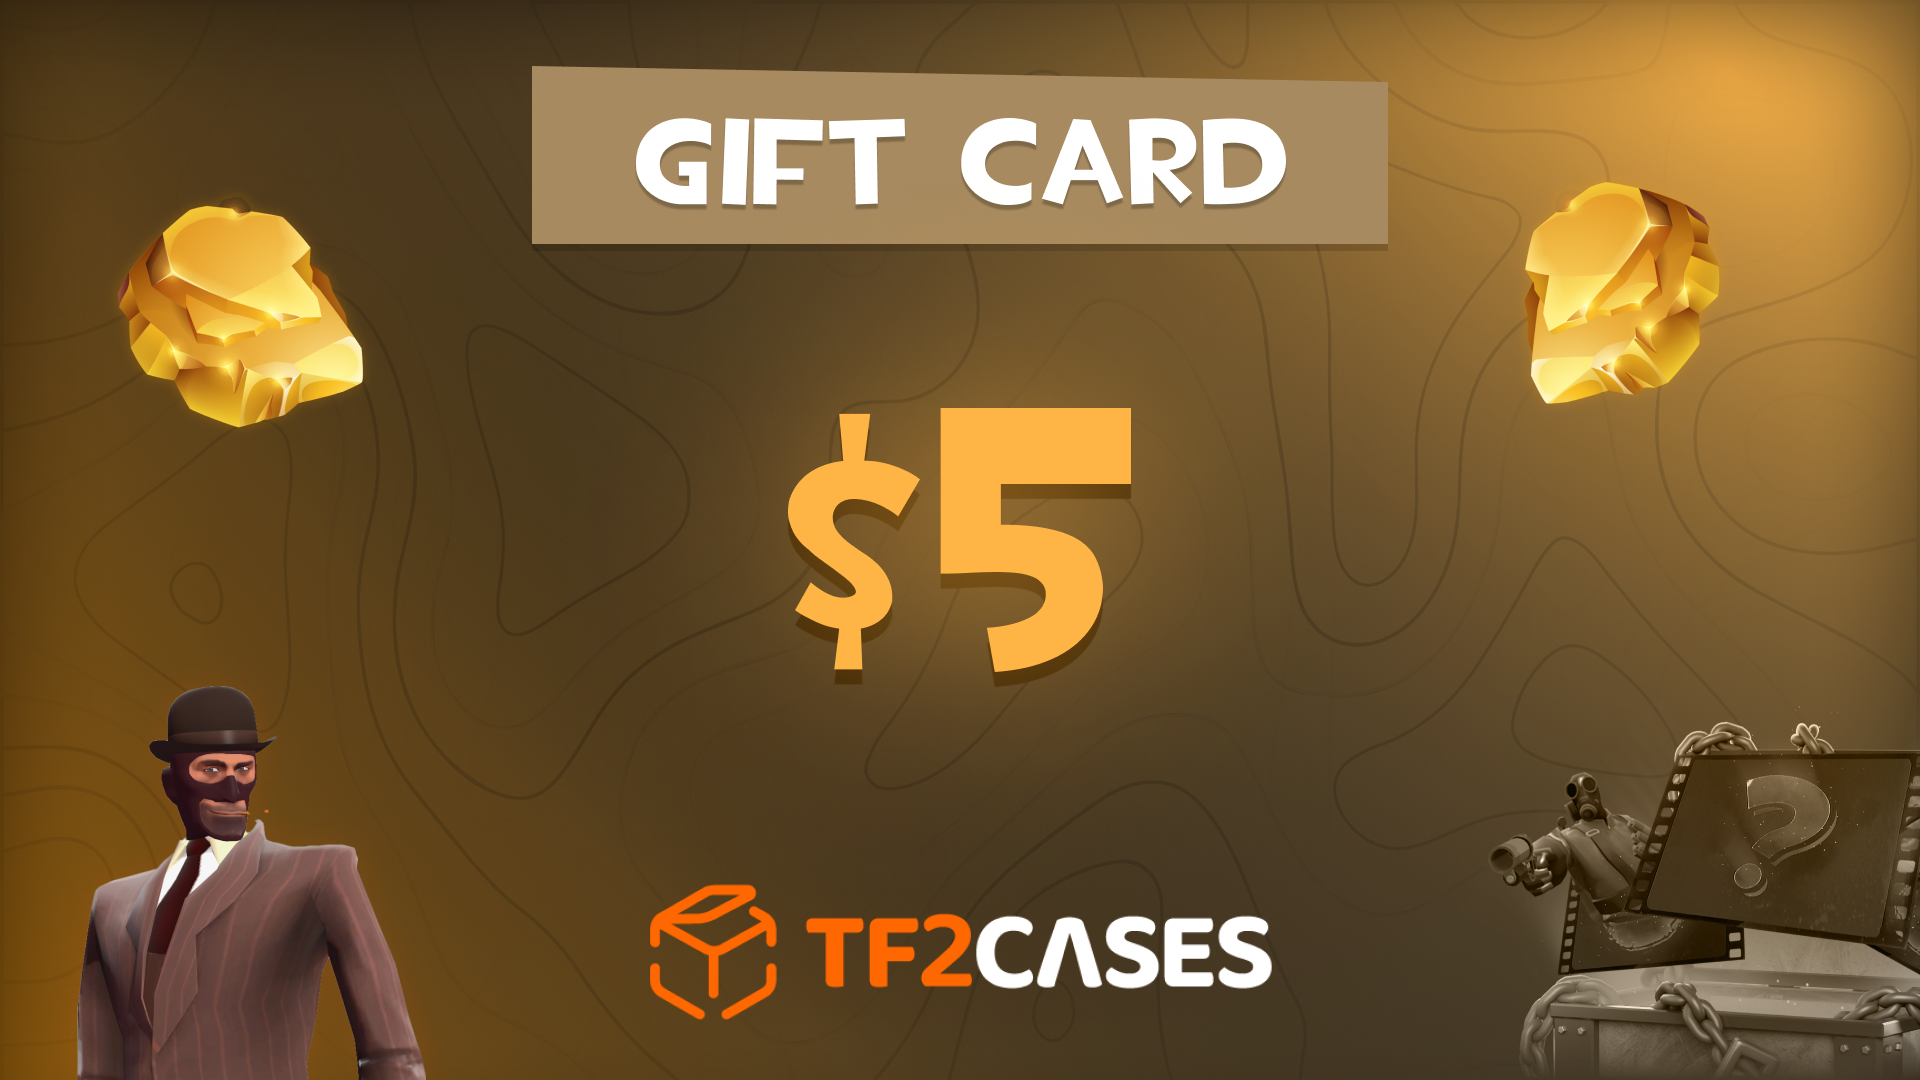 TF2CASES.com $5 Gift Card, 5.65$